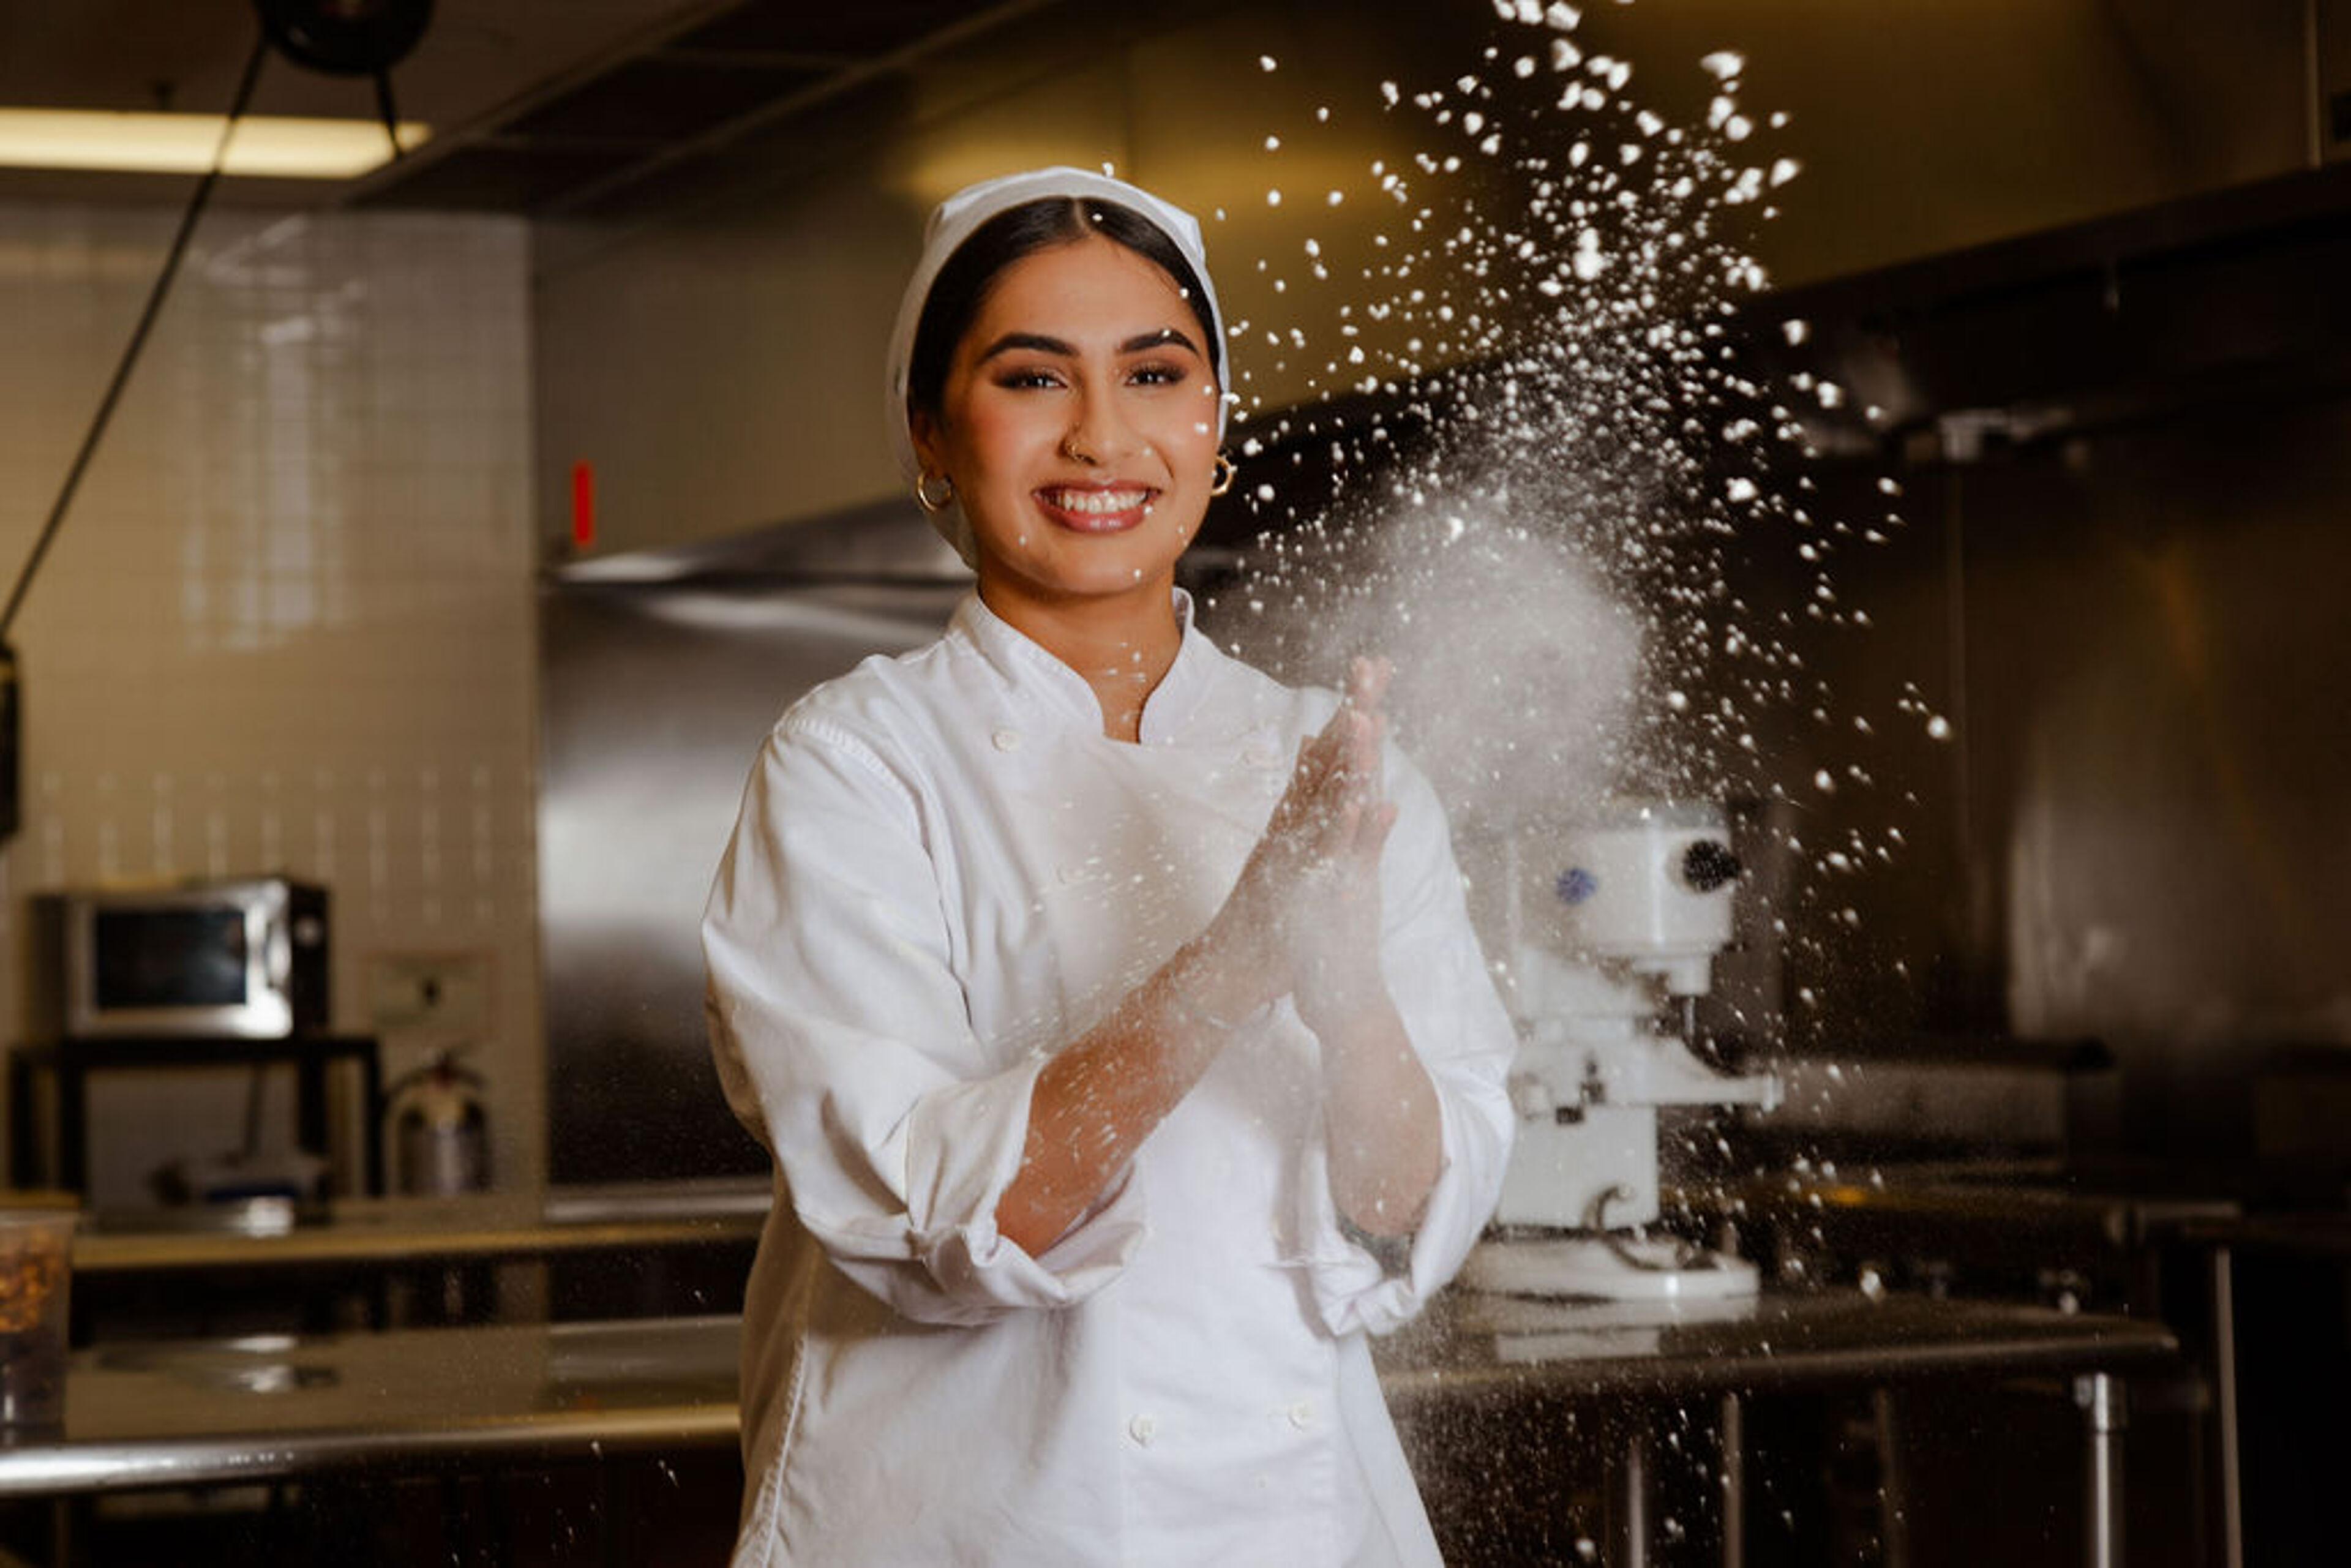 A smiling female chef clapping her hands with flour in a professional kitchen, creating a dynamic cloud of flour around her.